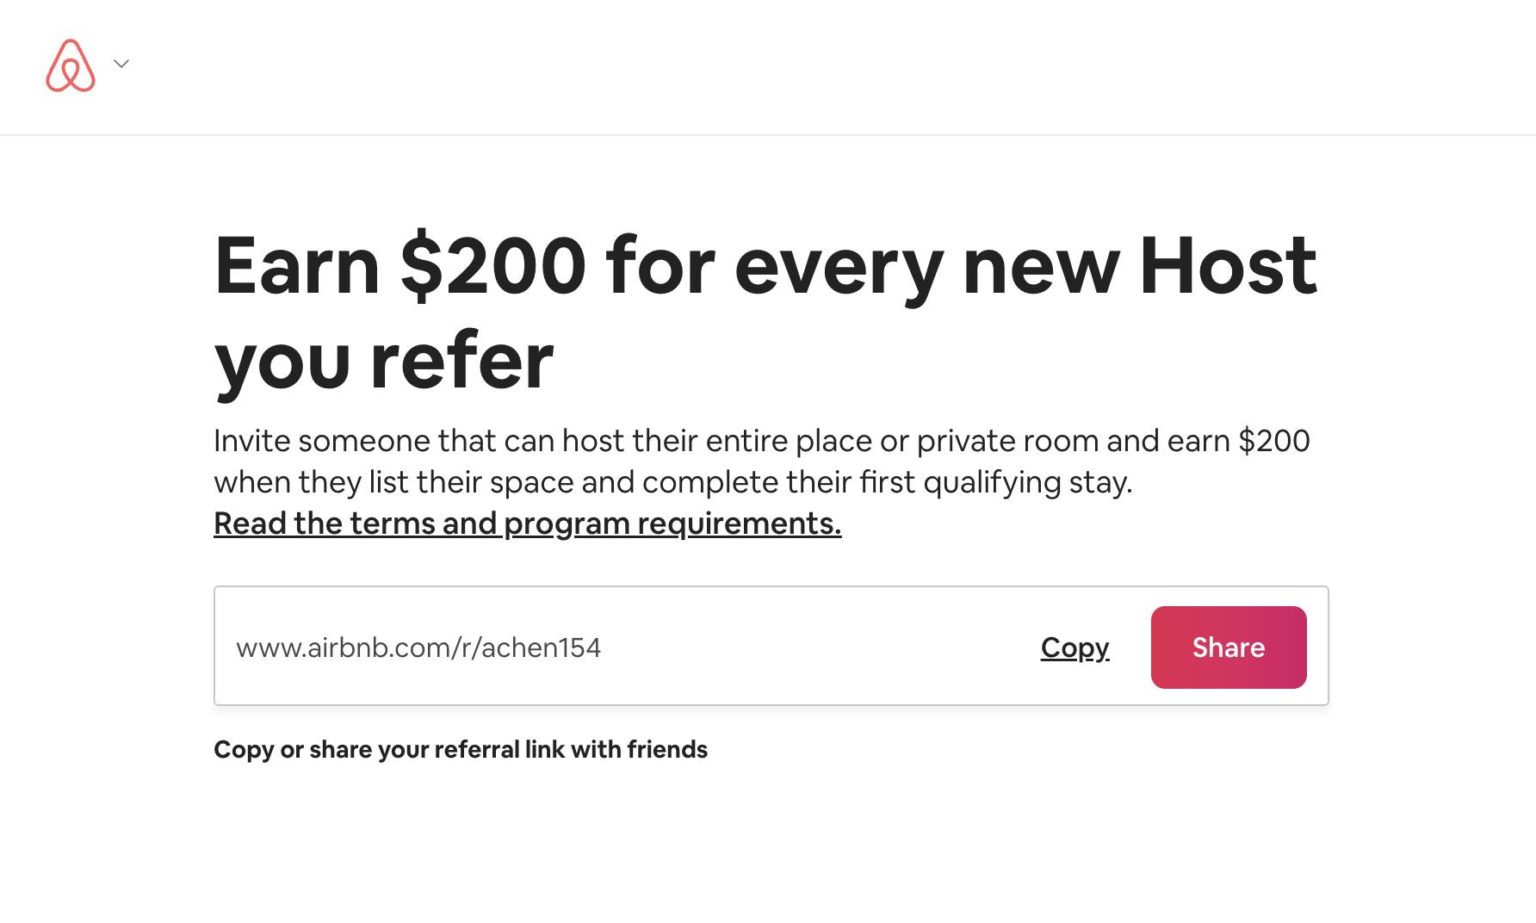 How to design a referral program at andrewchen